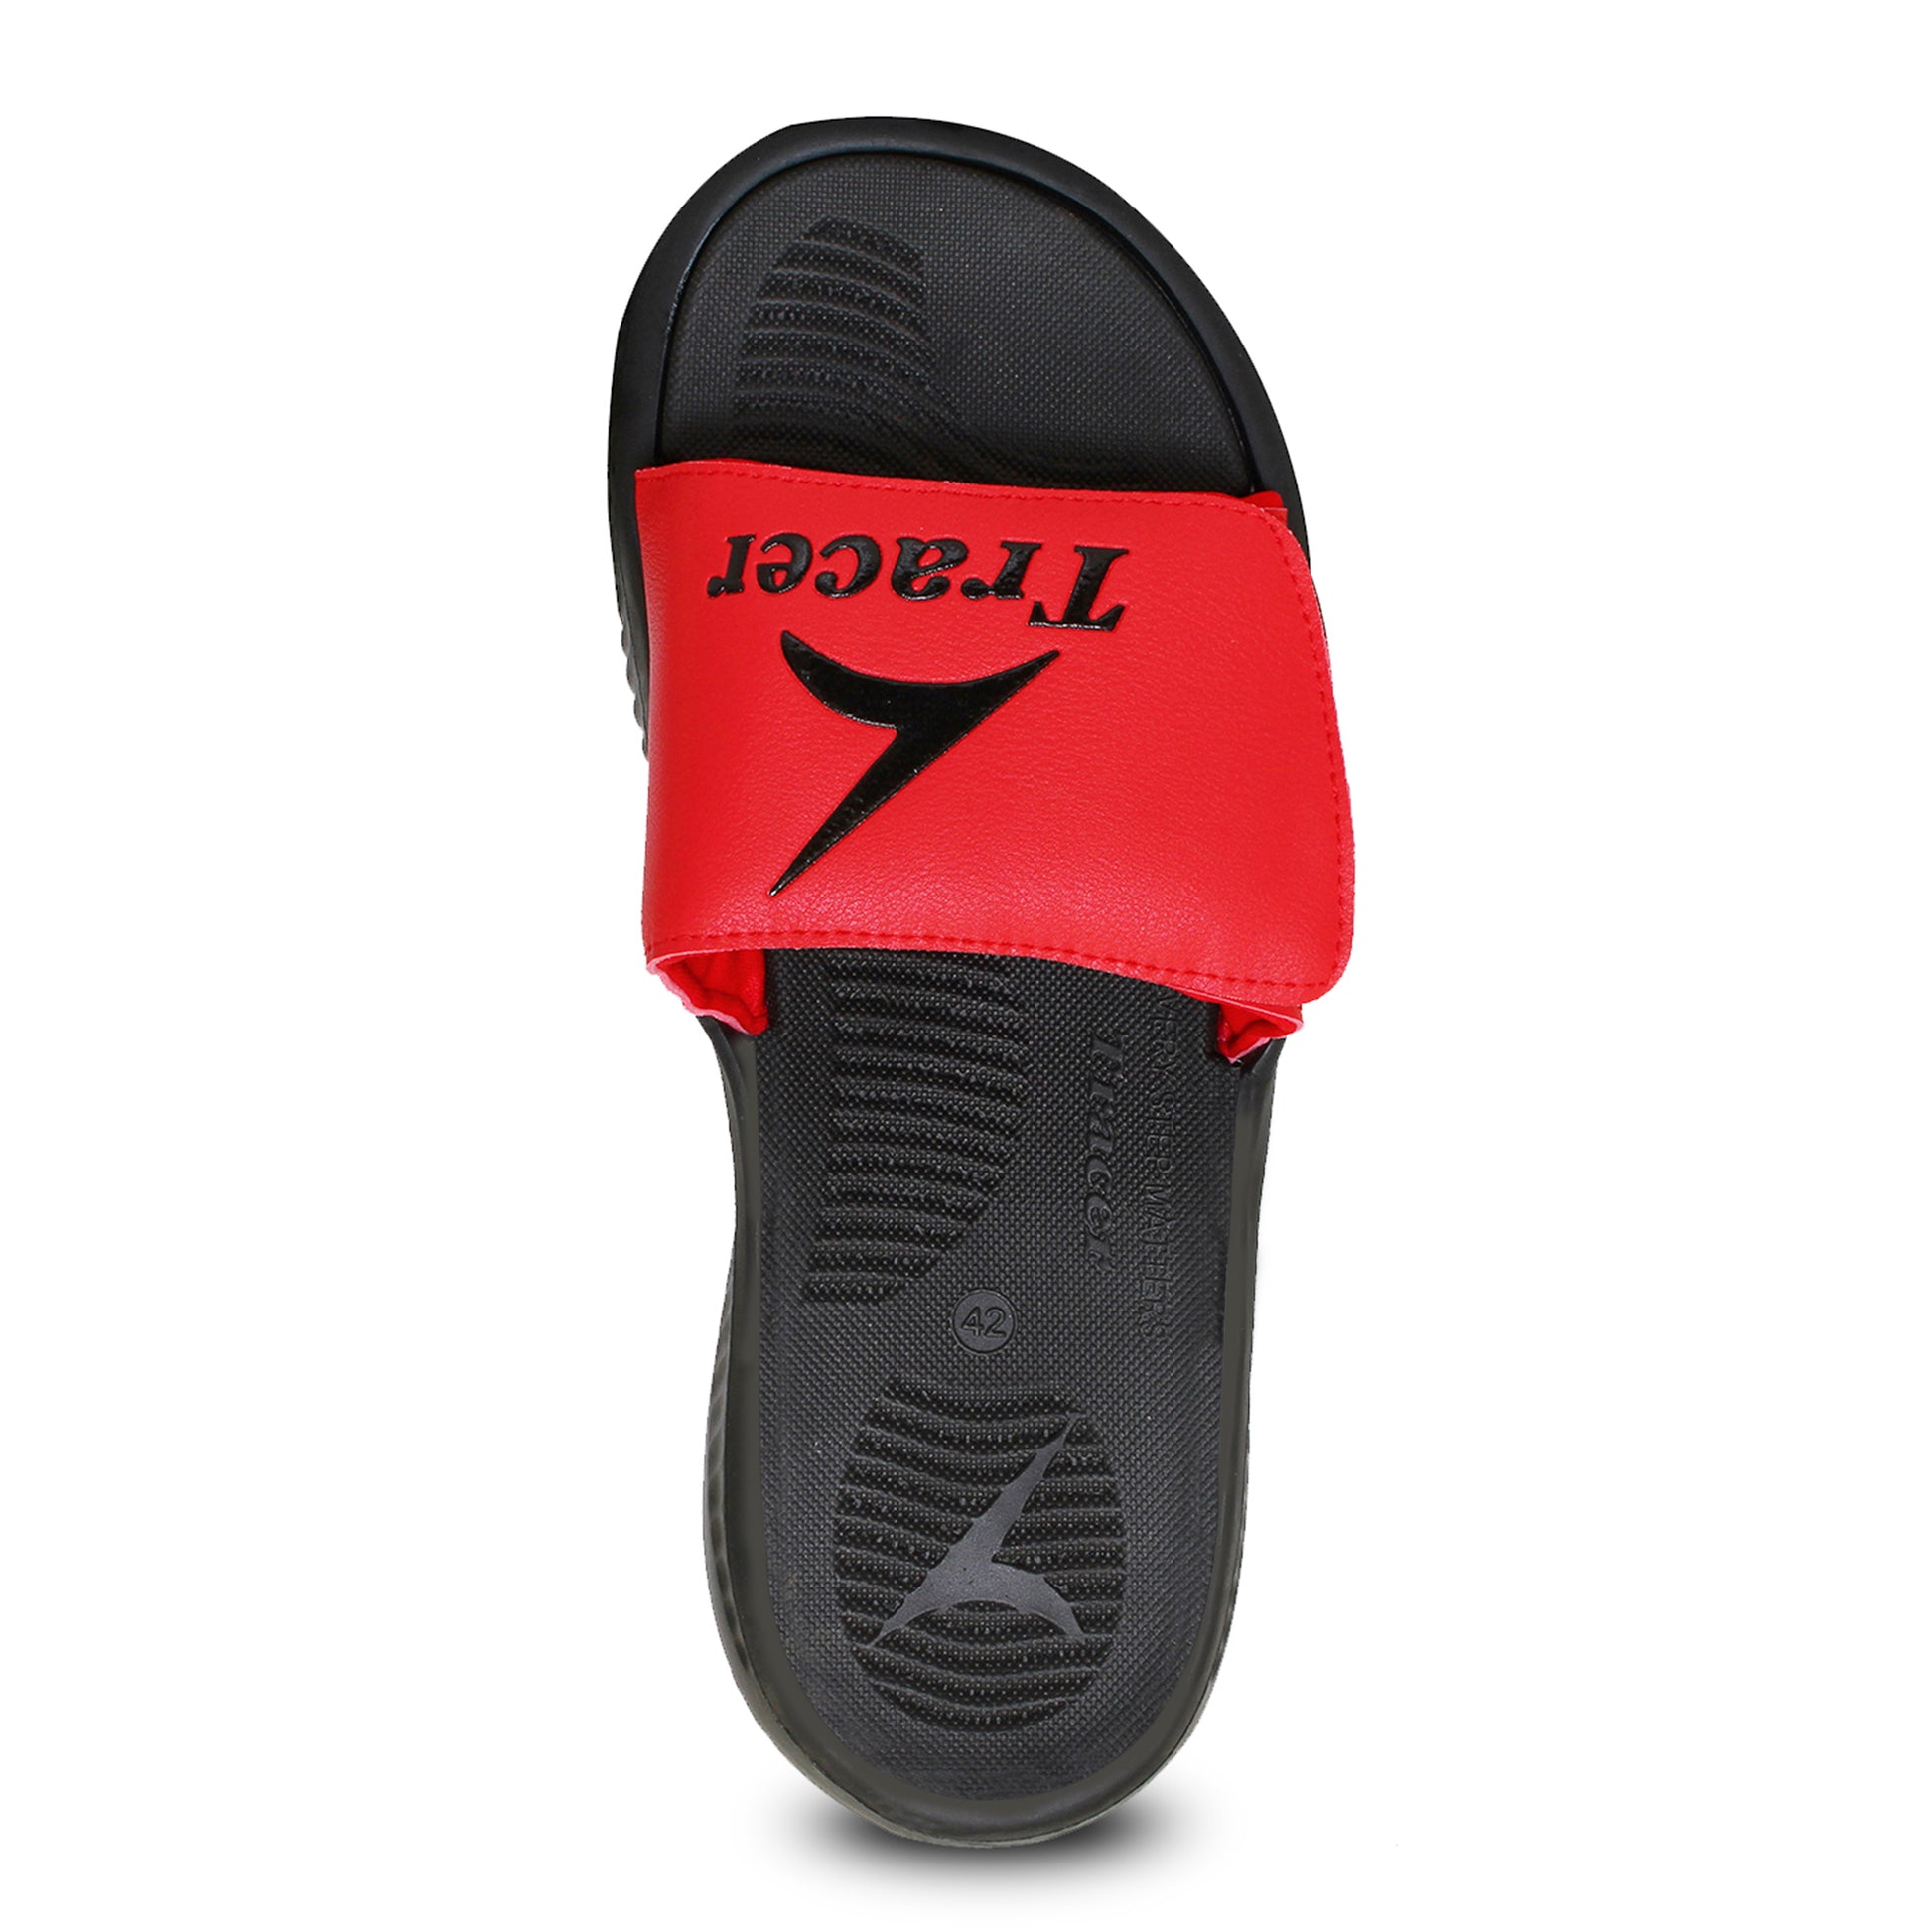 Flat Slippers For Men's Red